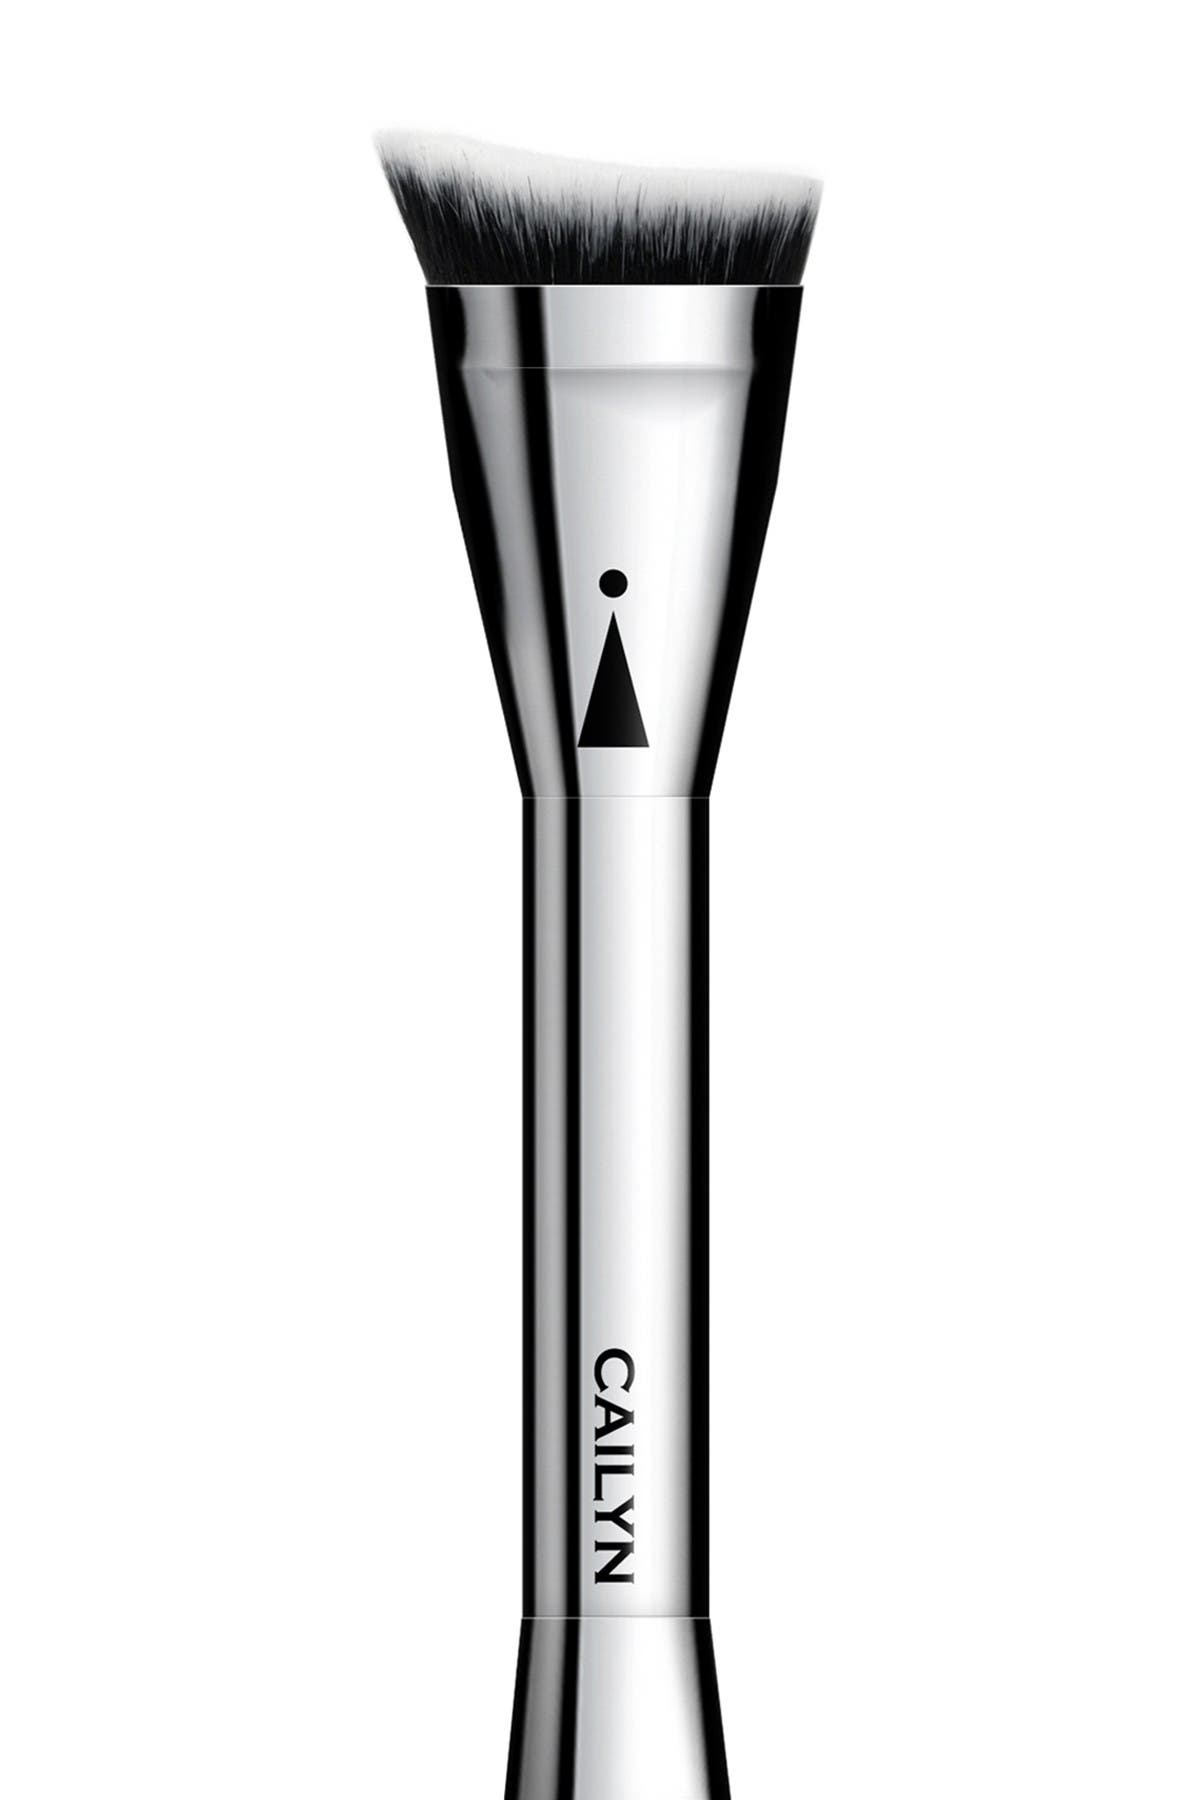 Cailyn Cosmetics Icone 13 Angled Contour Brush In Black / Silver